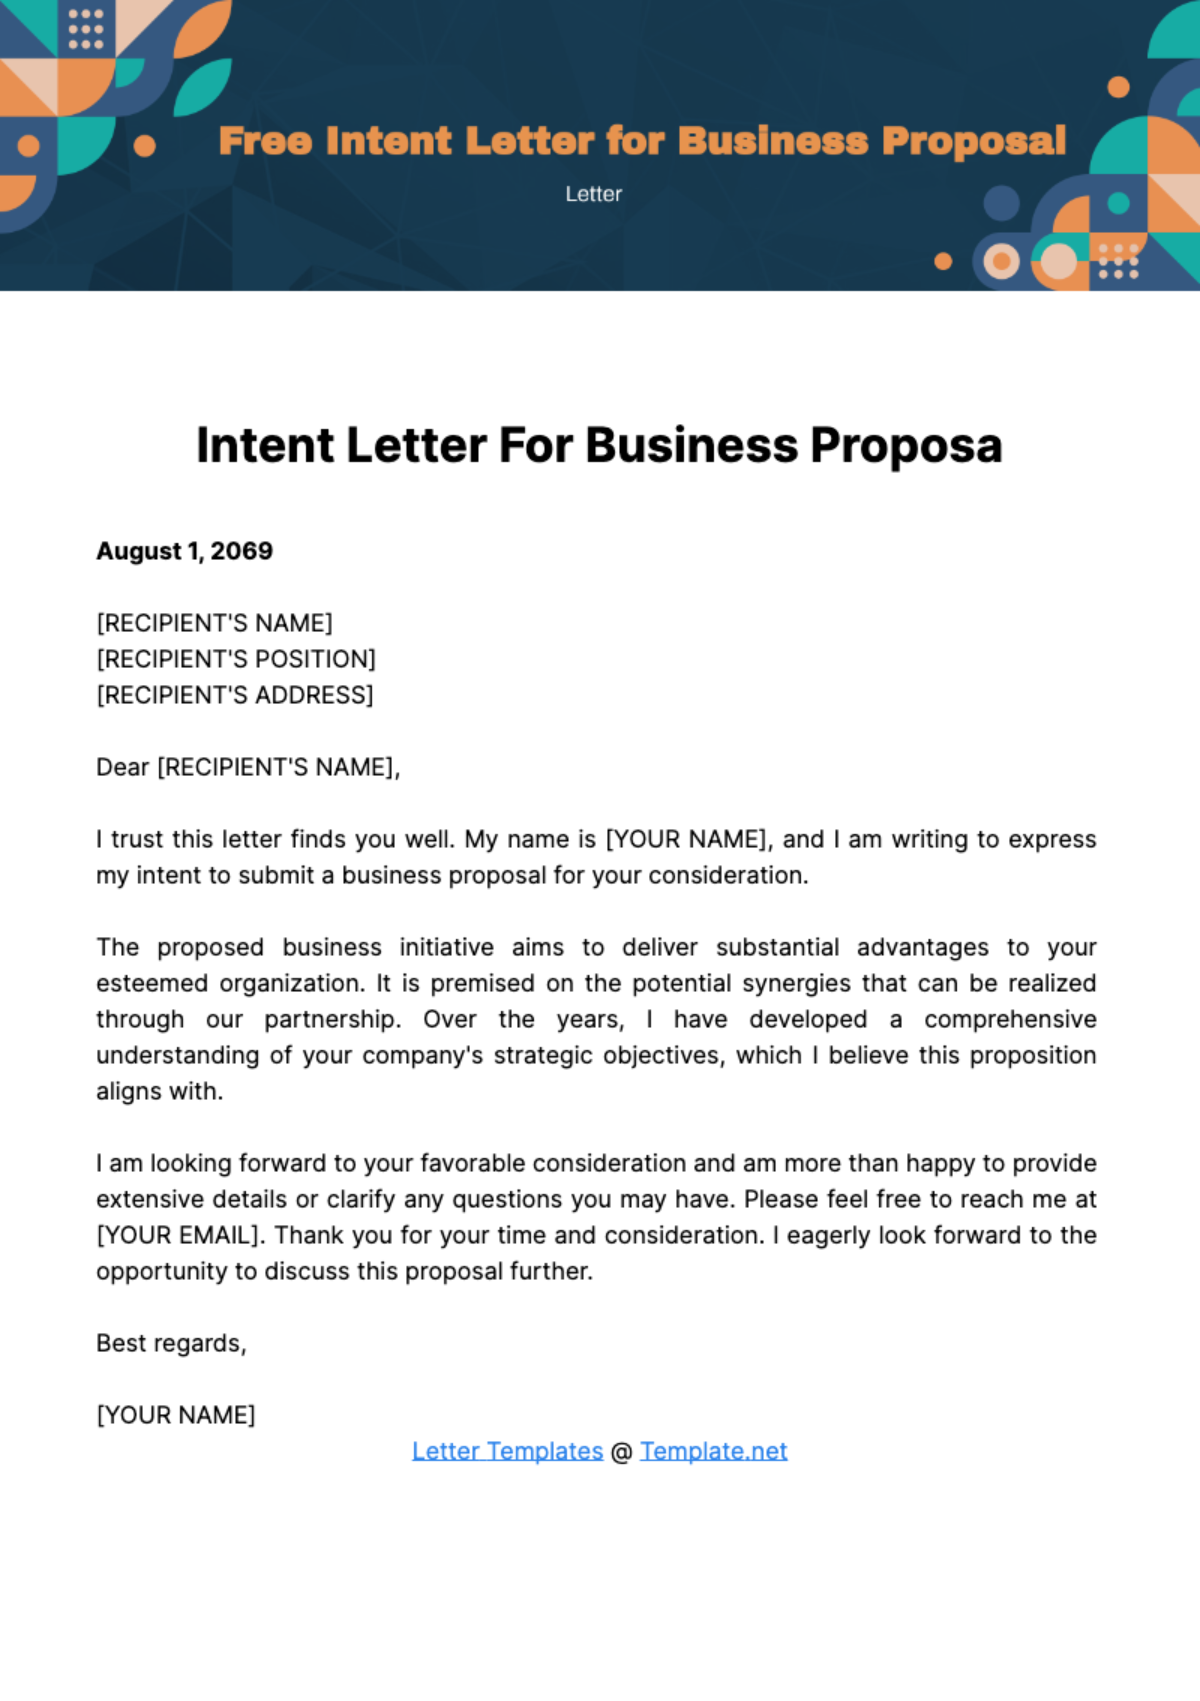 Intent Letter for Business Proposal Template